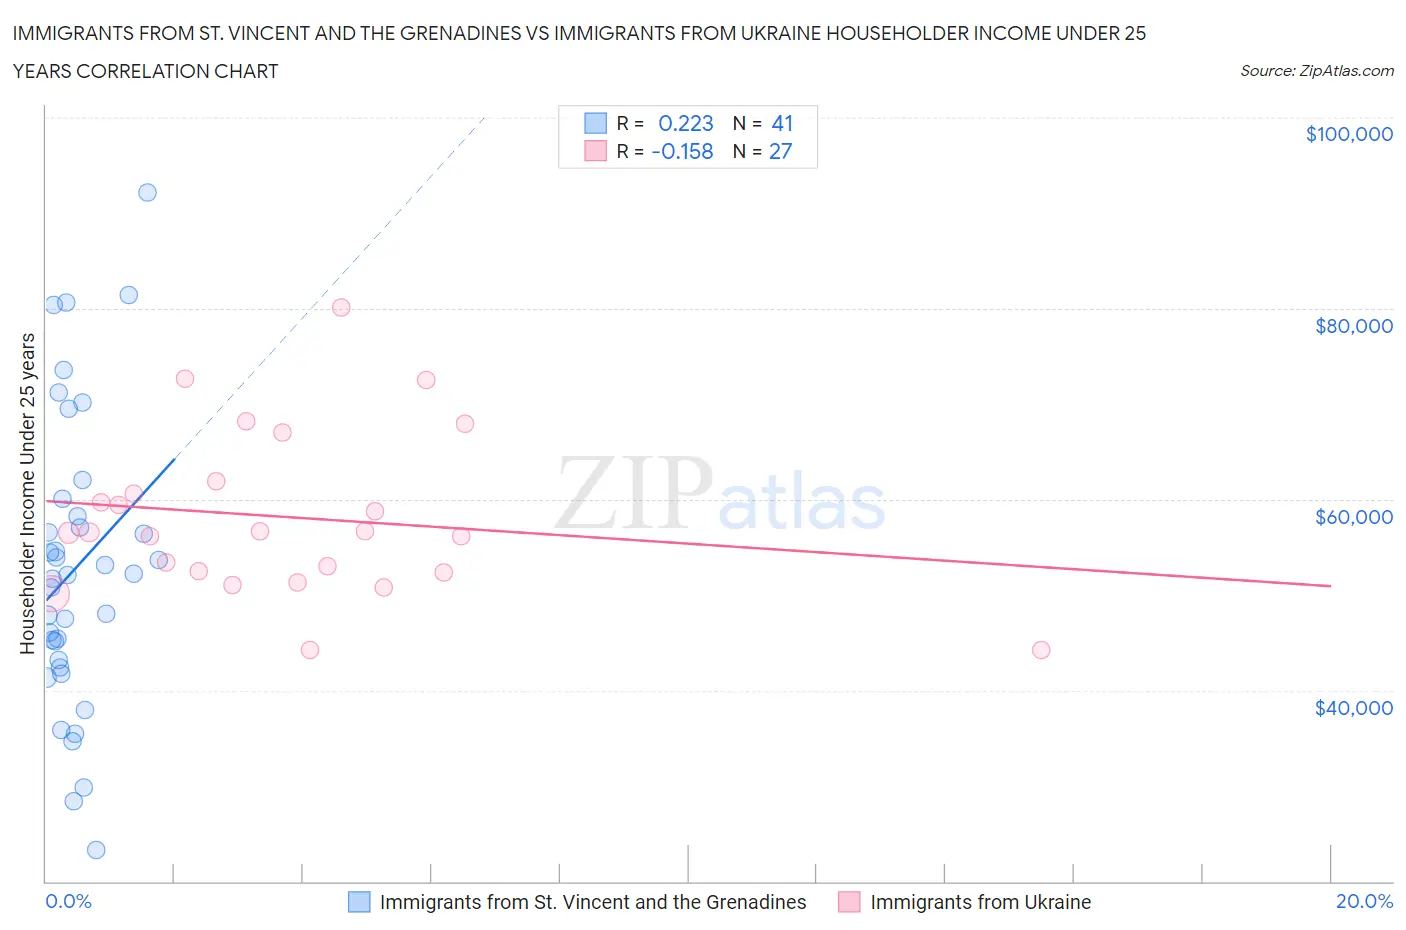 Immigrants from St. Vincent and the Grenadines vs Immigrants from Ukraine Householder Income Under 25 years